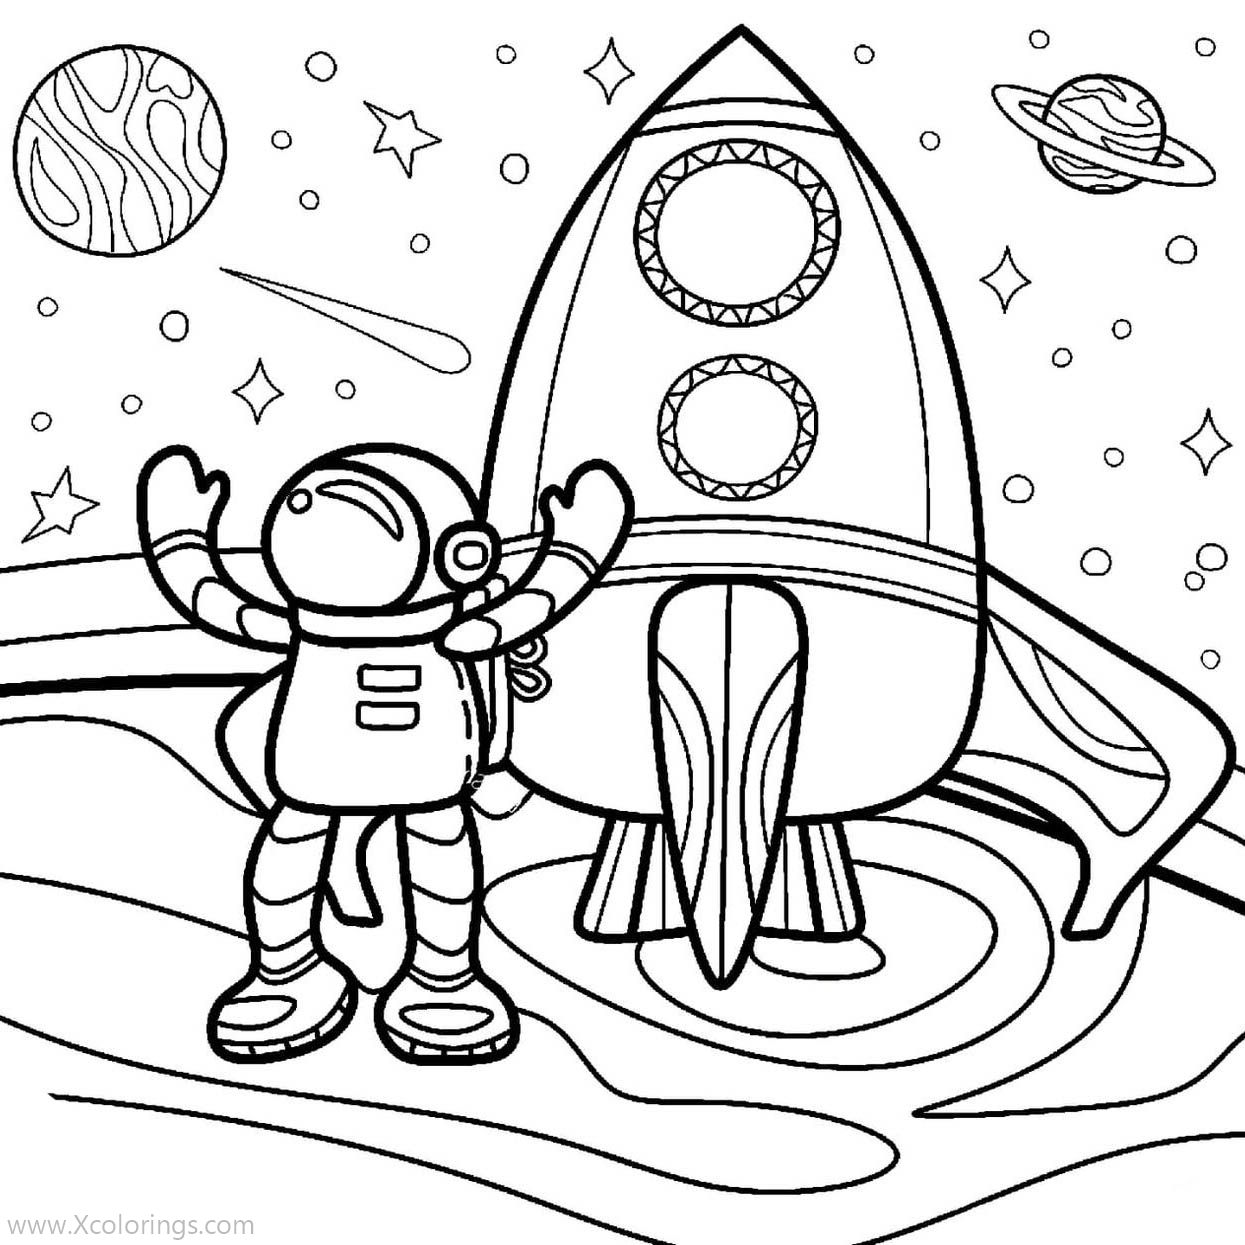 Free Cartoon Astronaut with Rocket Coloring Pages printable